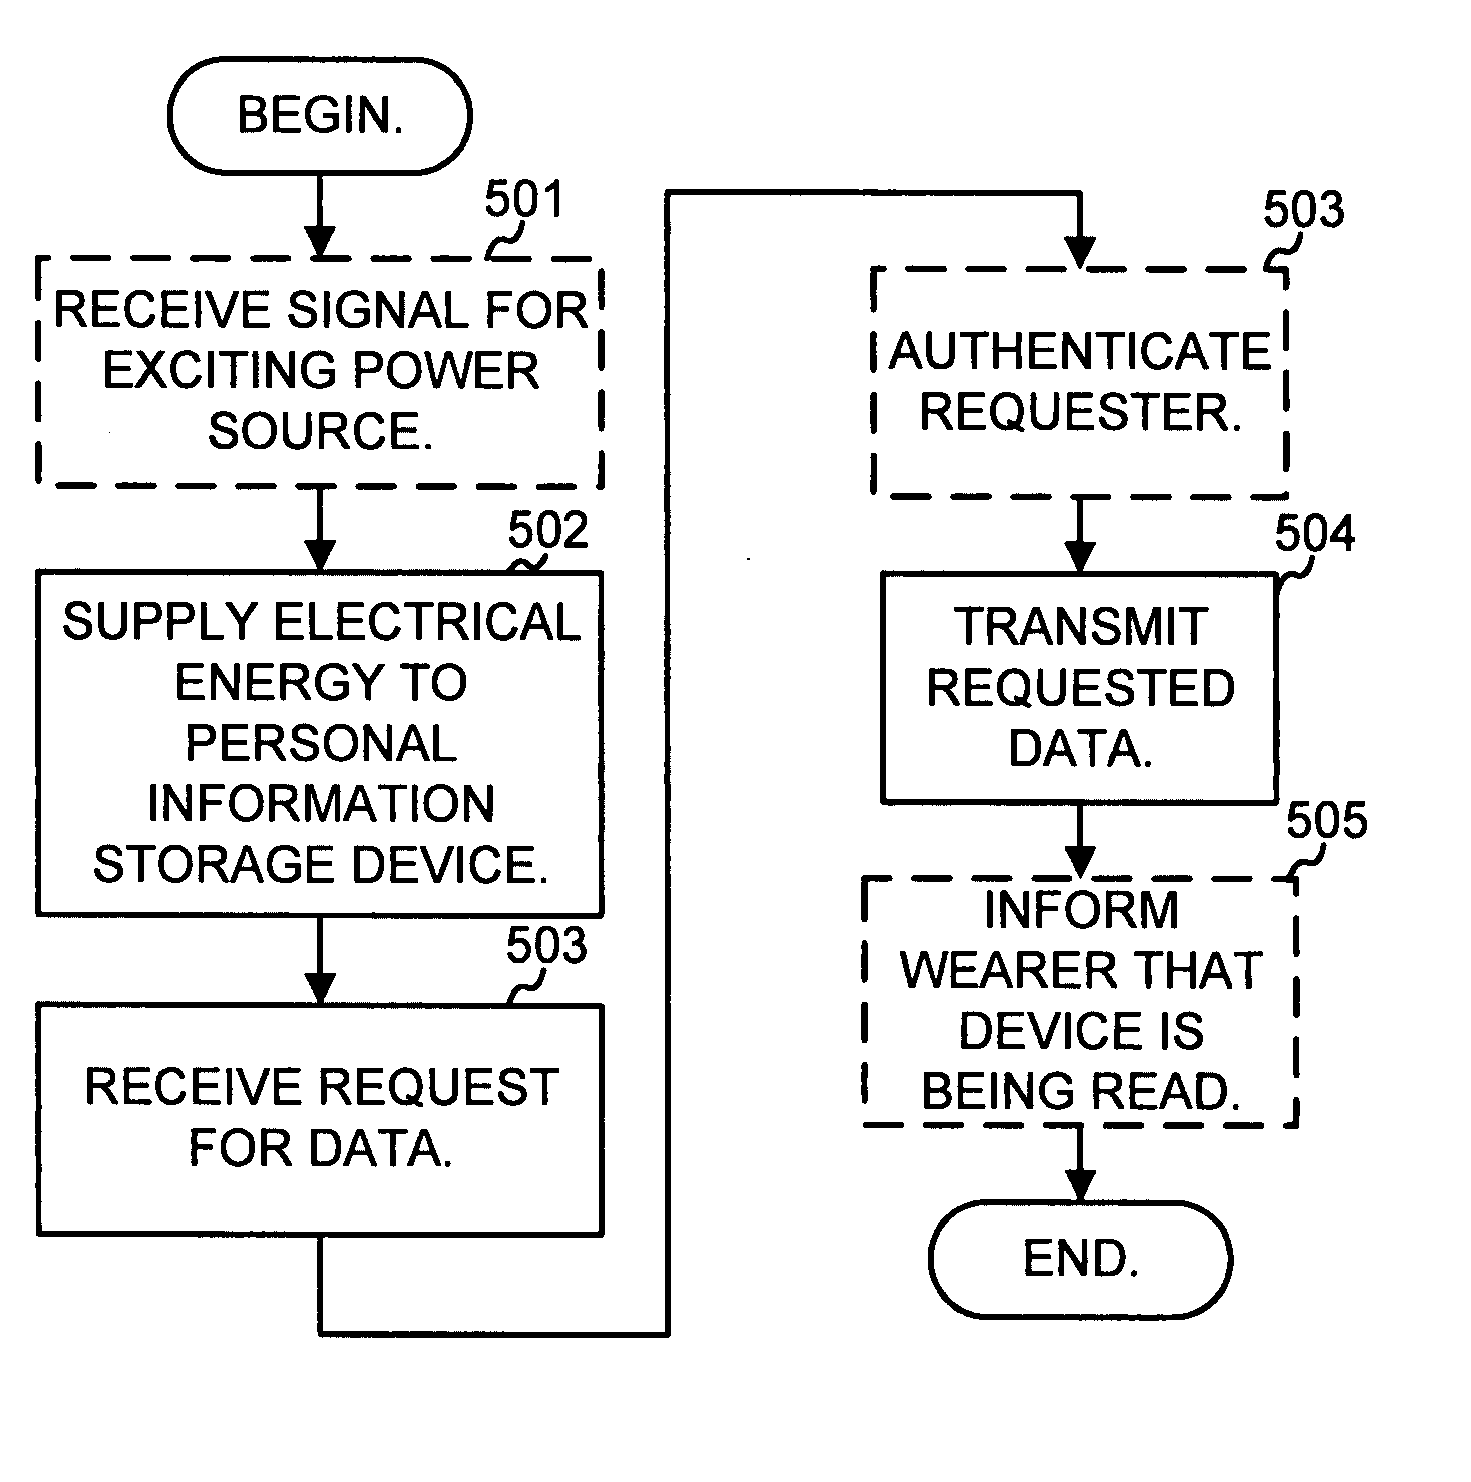 Attached personal information device